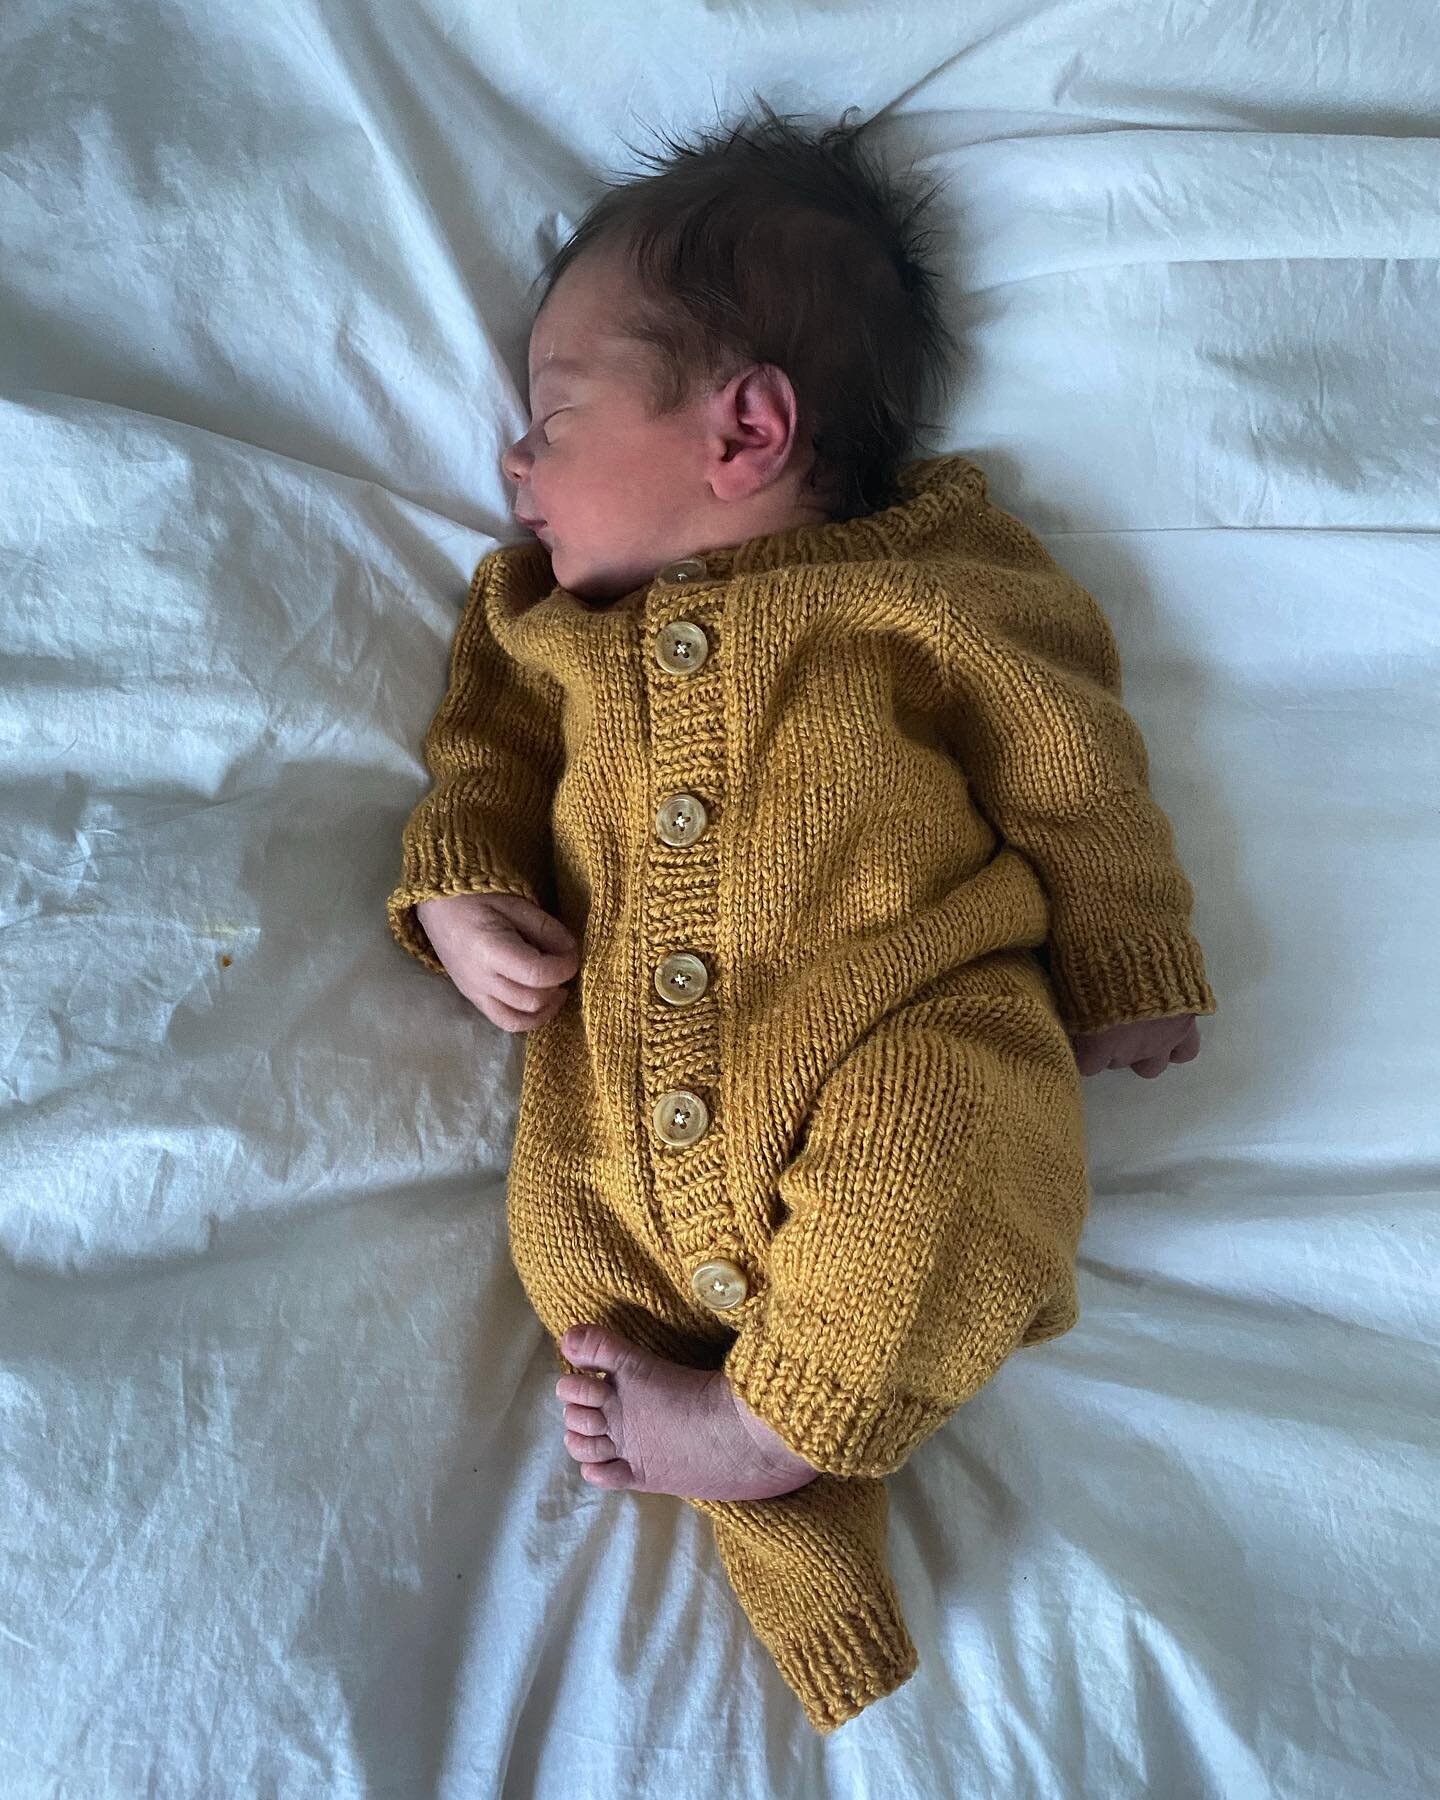 We had a baby 💙 Dolev Blue, born at home on 2.27.22. Taking some time away from Instagram but still stocking shelves with fresh hummus and tahini dip, starting seedlings for the approaching growing season, and booking events for 2023! Thanks to our 